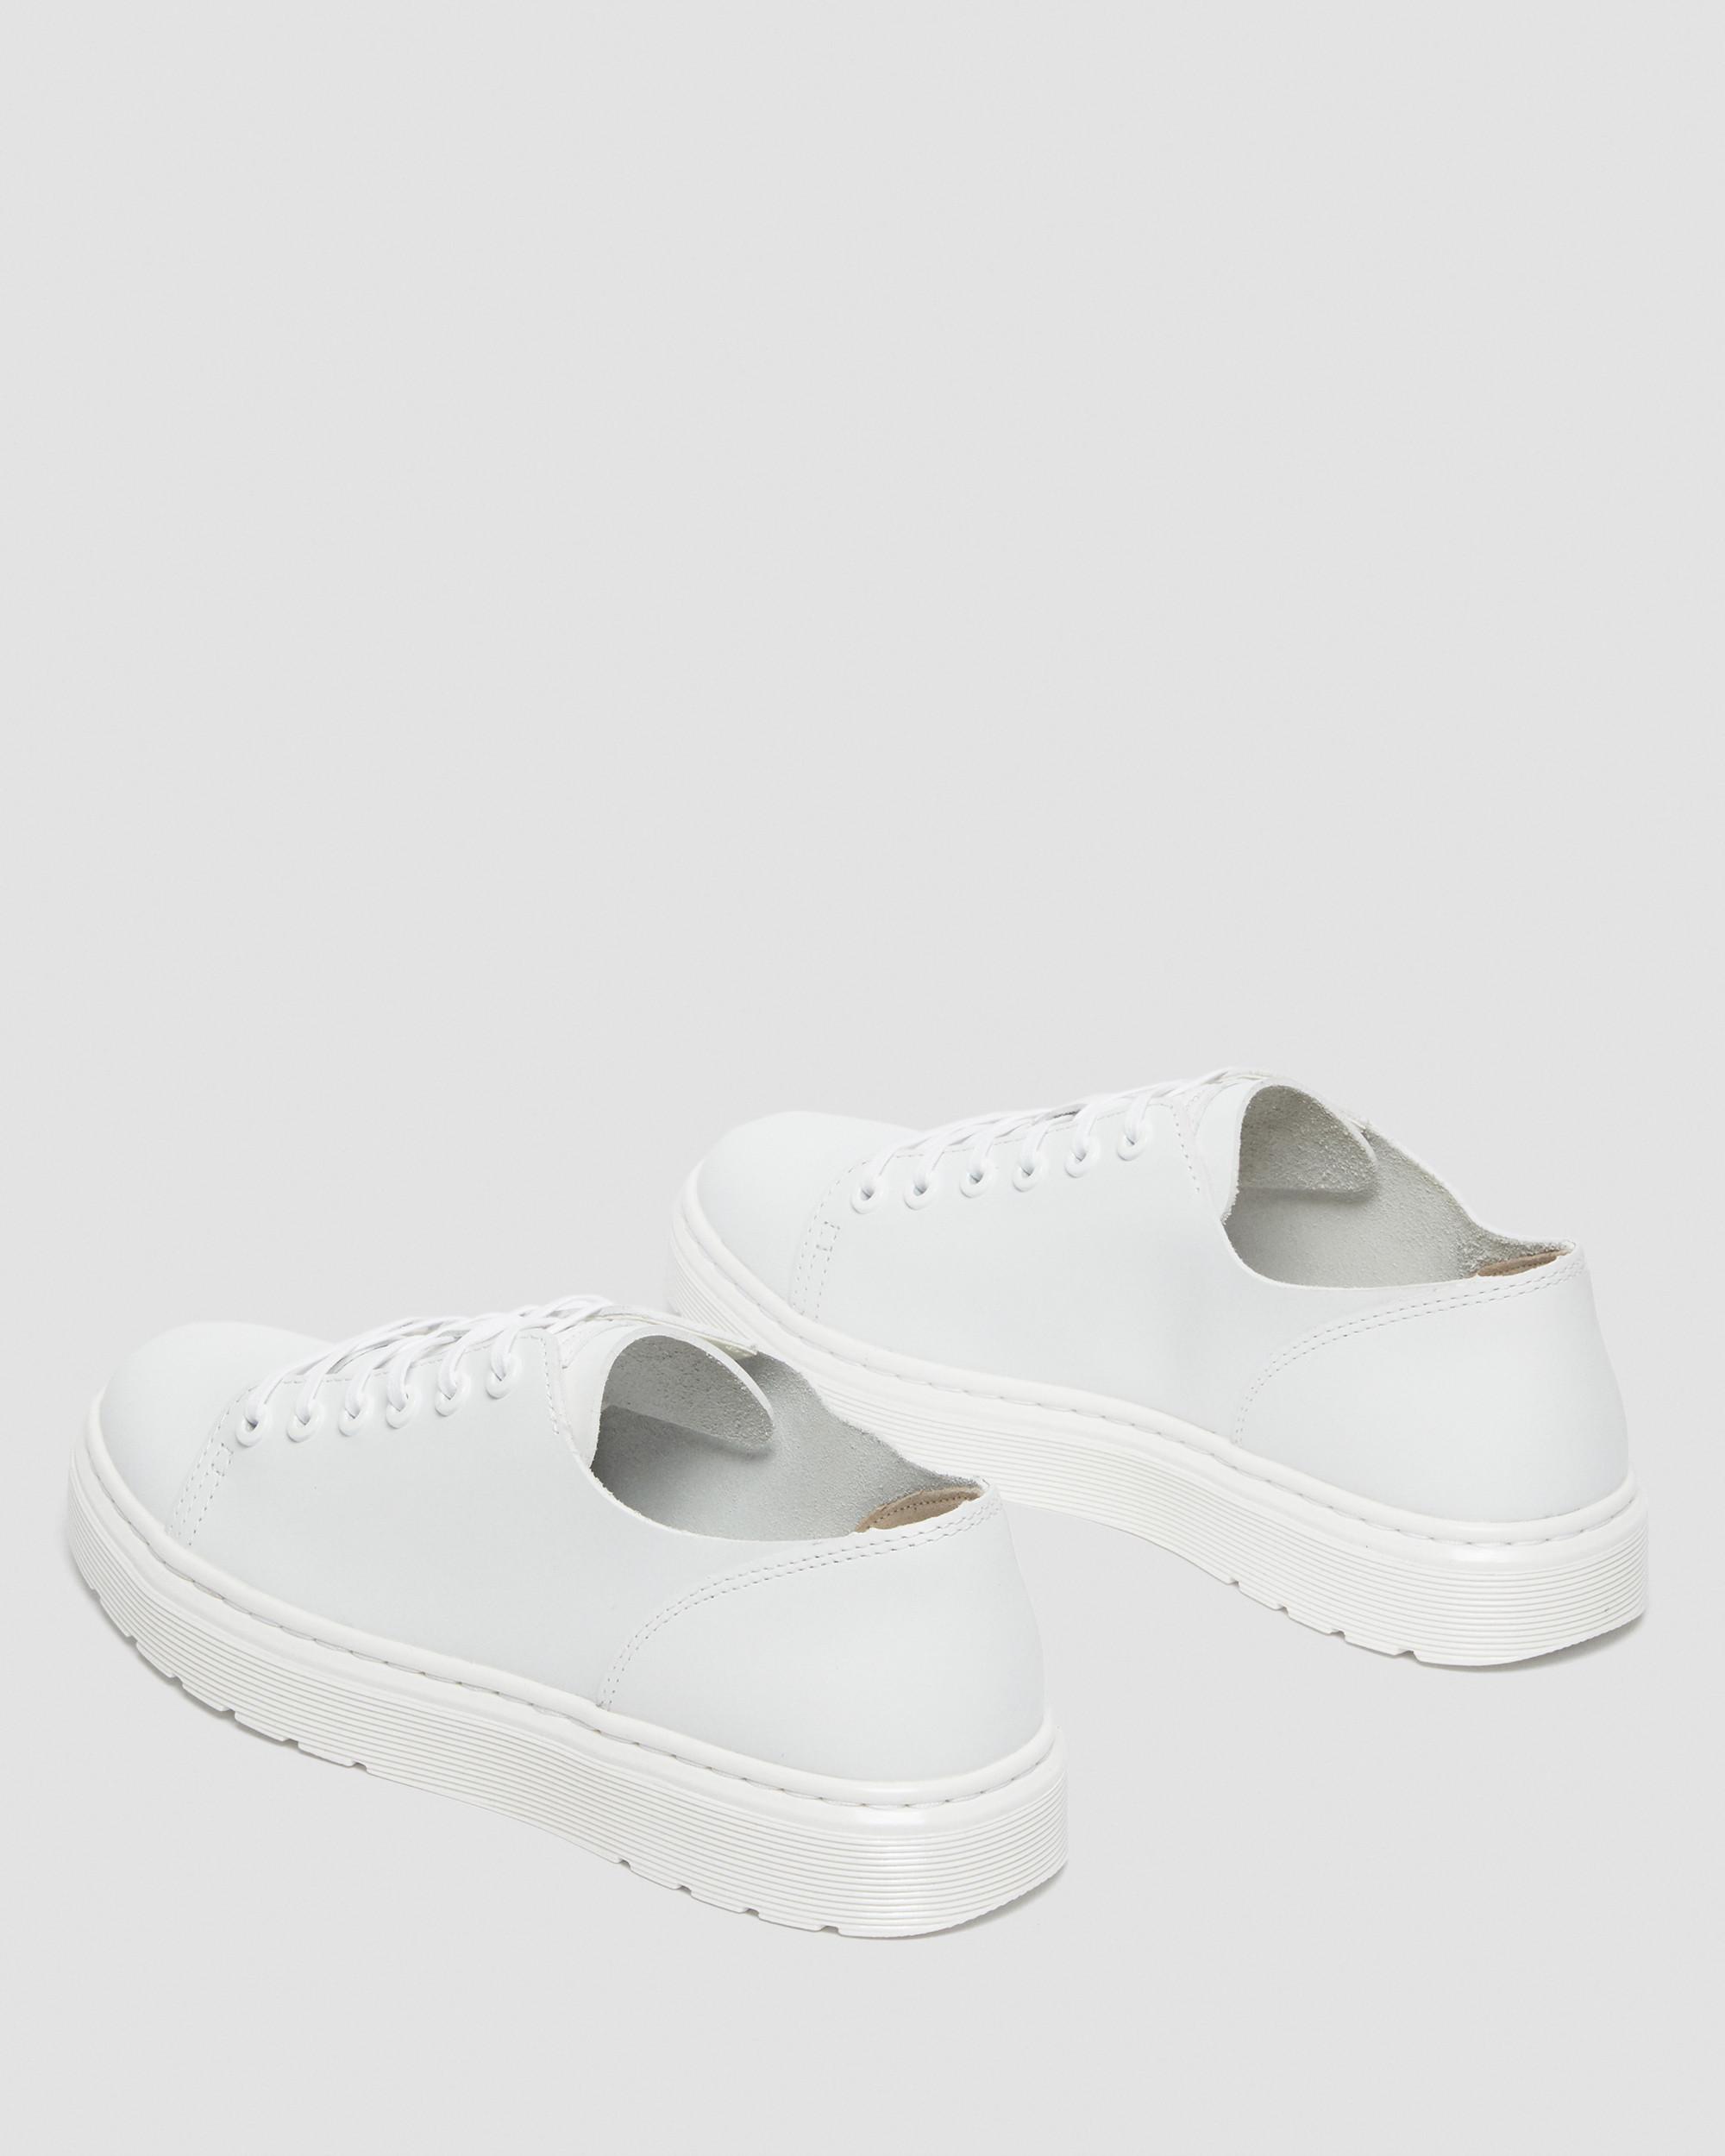 Dante Venice Leather Casual Shoes in White